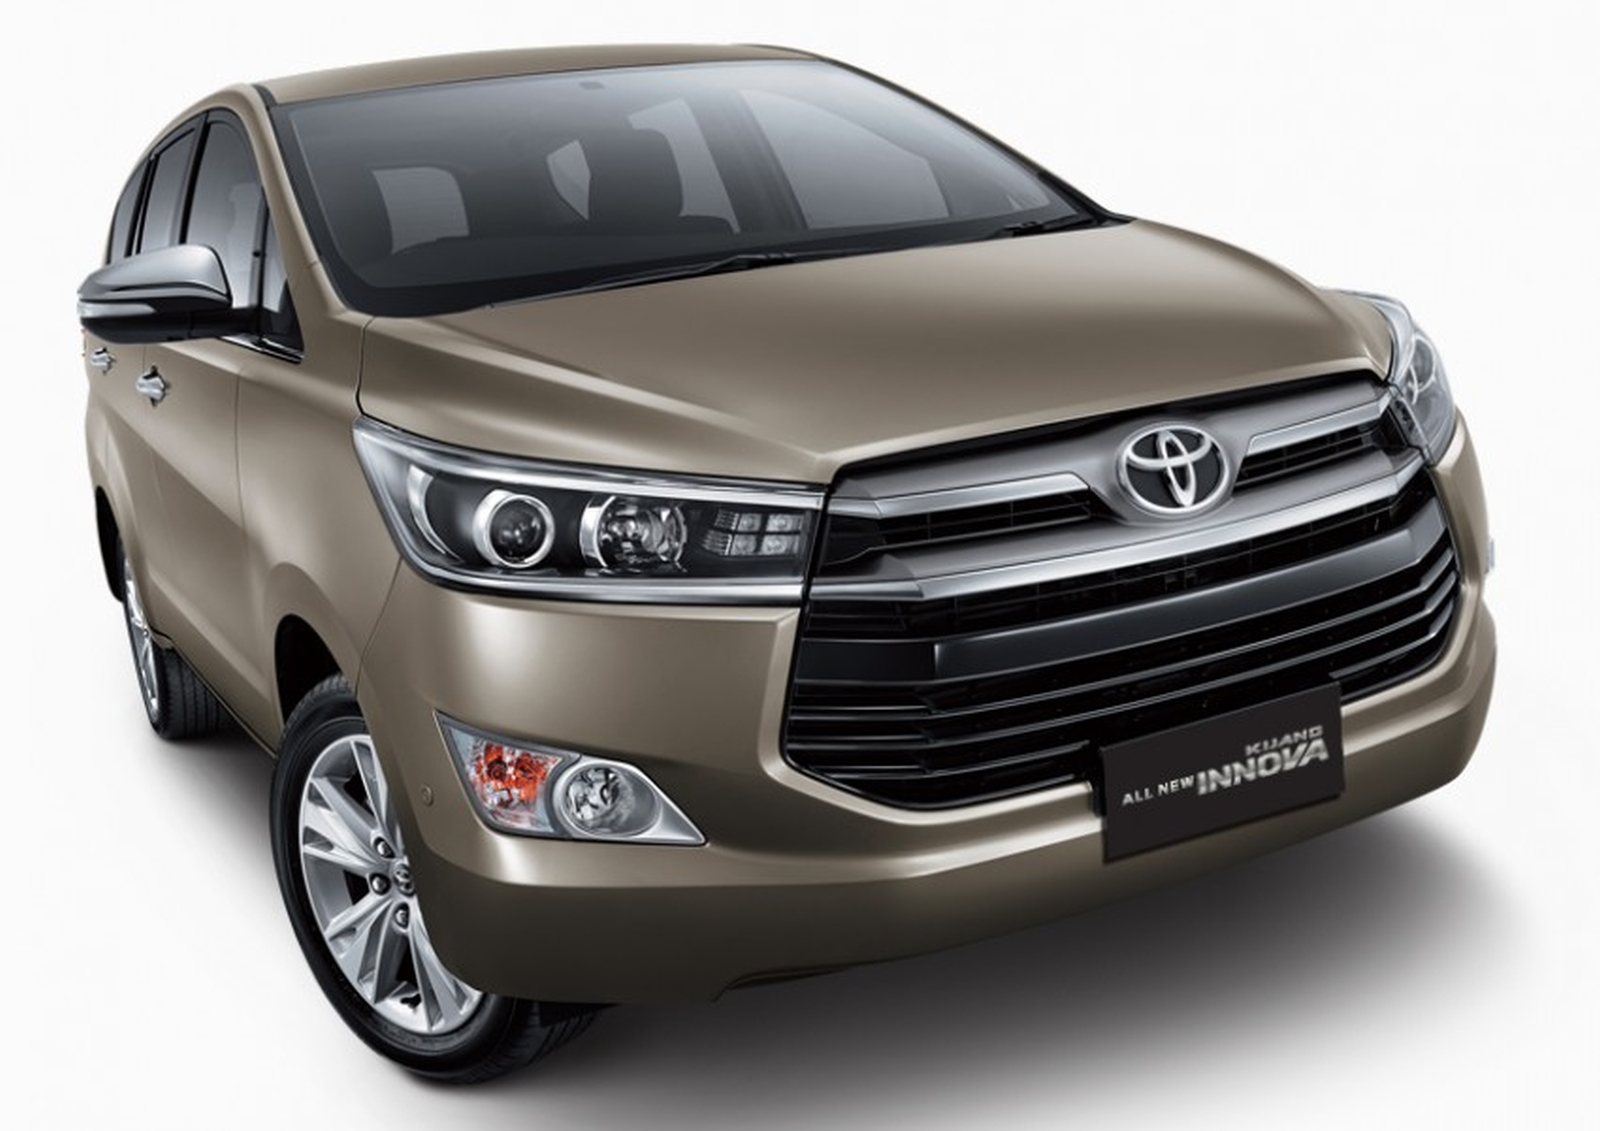 2016 Toyota Innova officially revealed: Images, details, official video